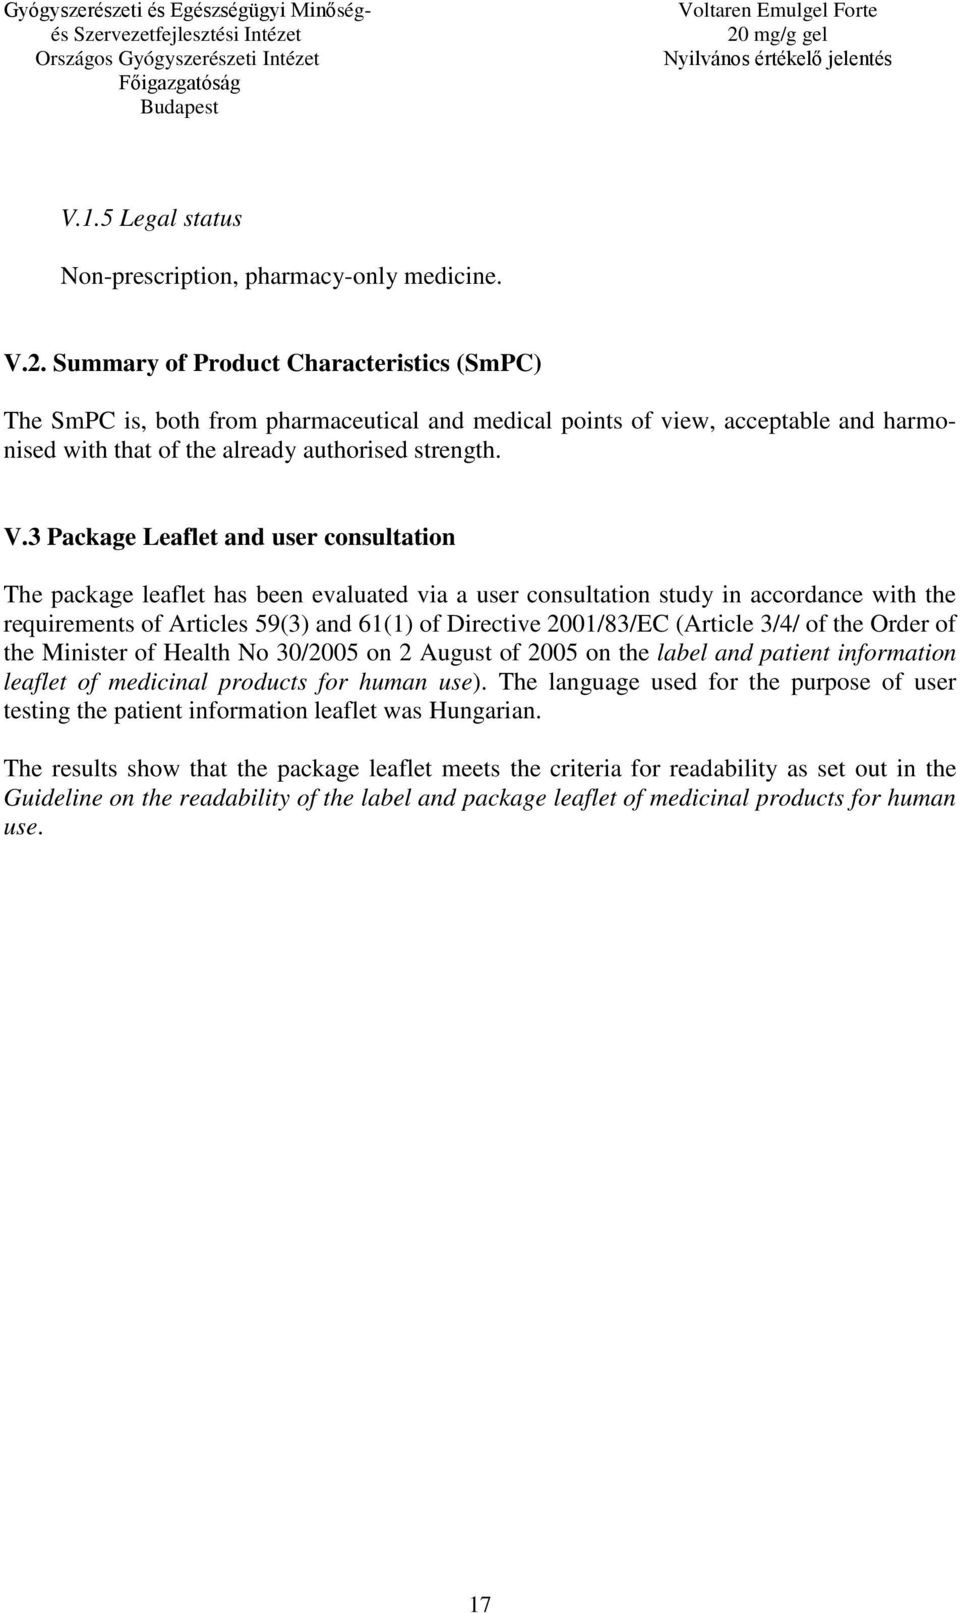 3 Package Leaflet and user consultation The package leaflet has been evaluated via a user consultation study in accordance with the requirements of Articles 59(3) and 61(1) of Directive 2001/83/EC